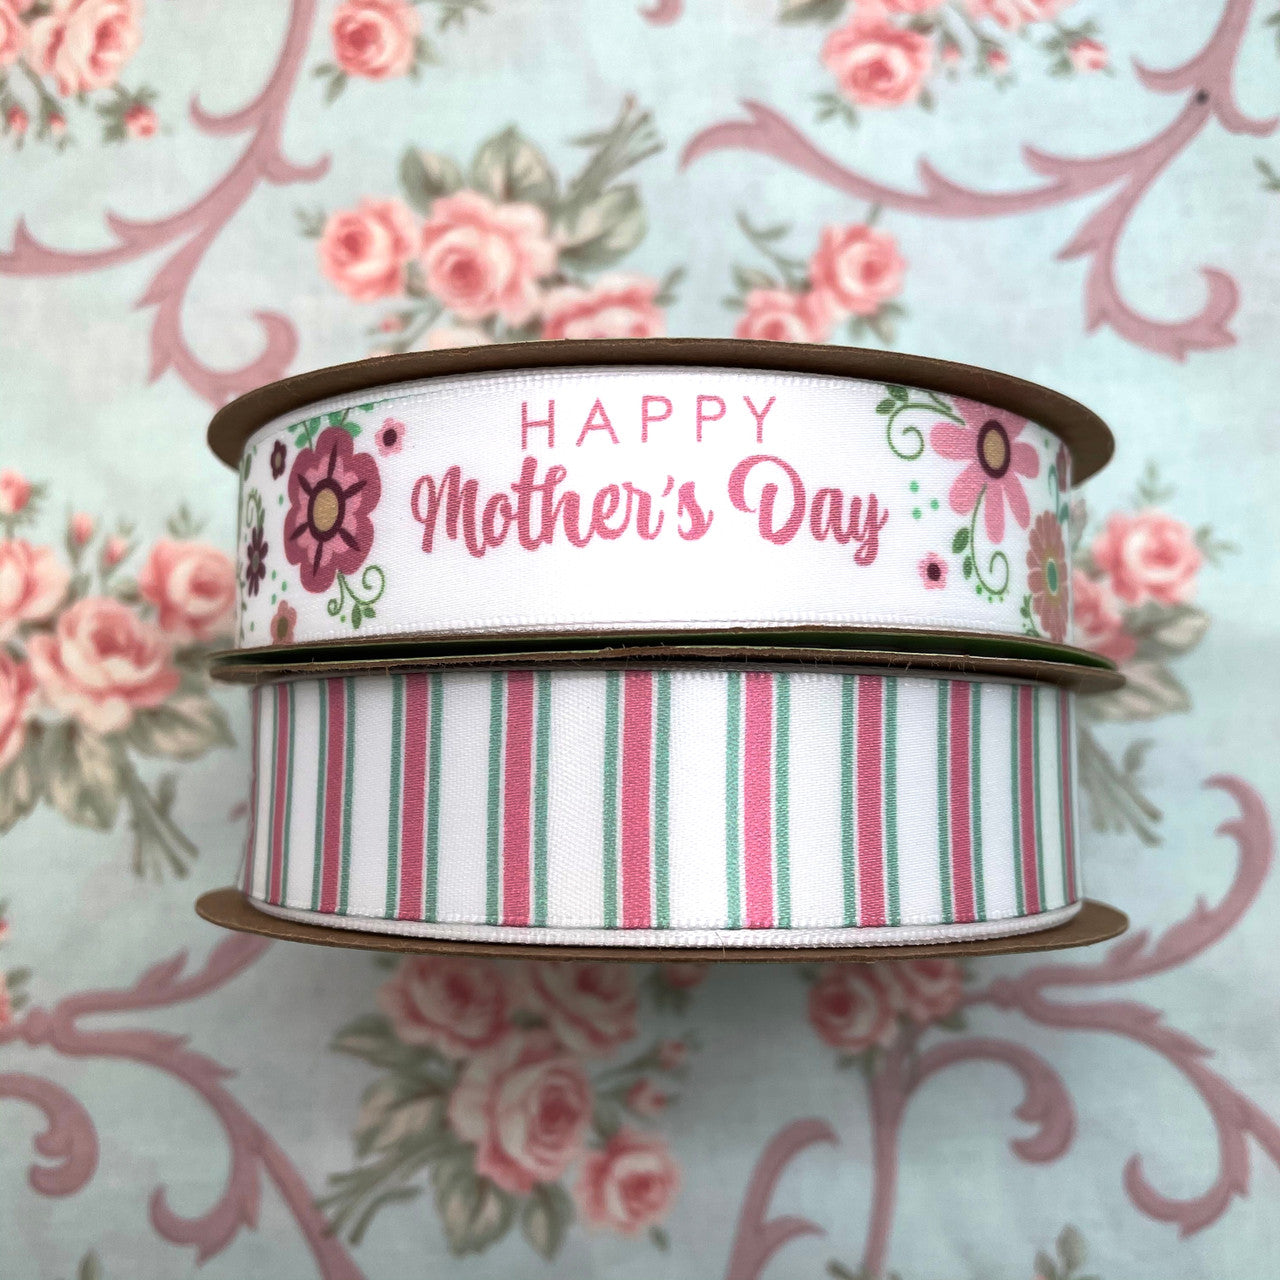 Mix our pink and sage stripes with our Happy Mother's Day ribbon! Mom will love the attention to detail to make her day extra special!